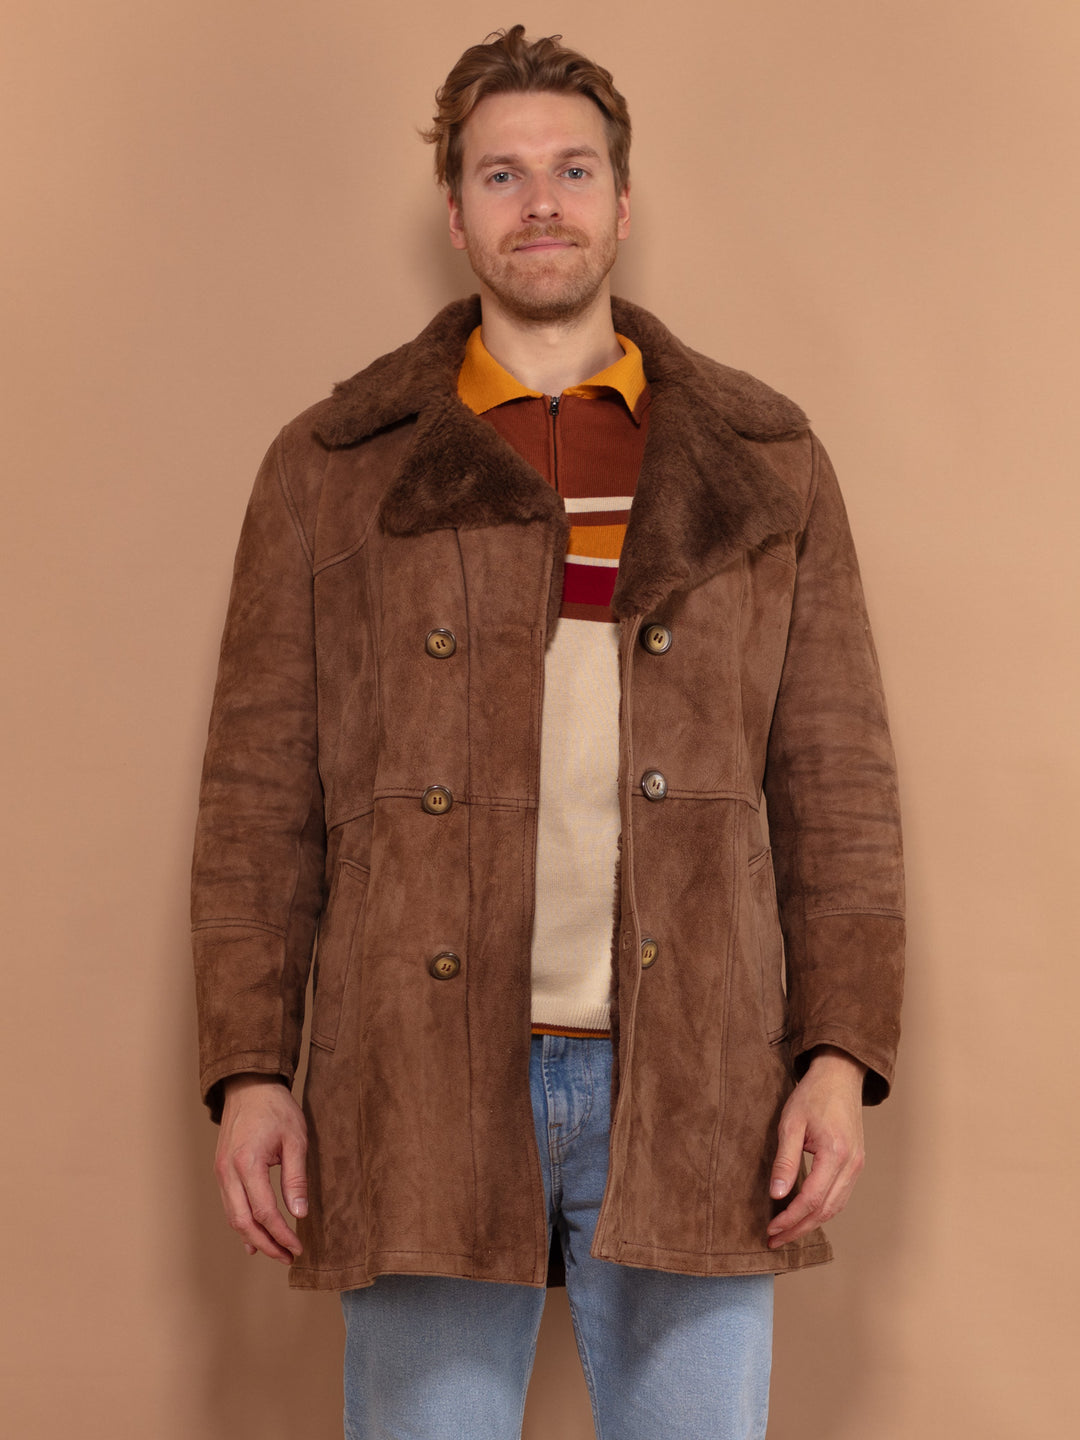 Double Breasted Sheepskin Coat 70s, Size Medium, Vintage Mens Winter Coat, Brown Shearling Coat, Retro Winter Outerwear, Gift For Man